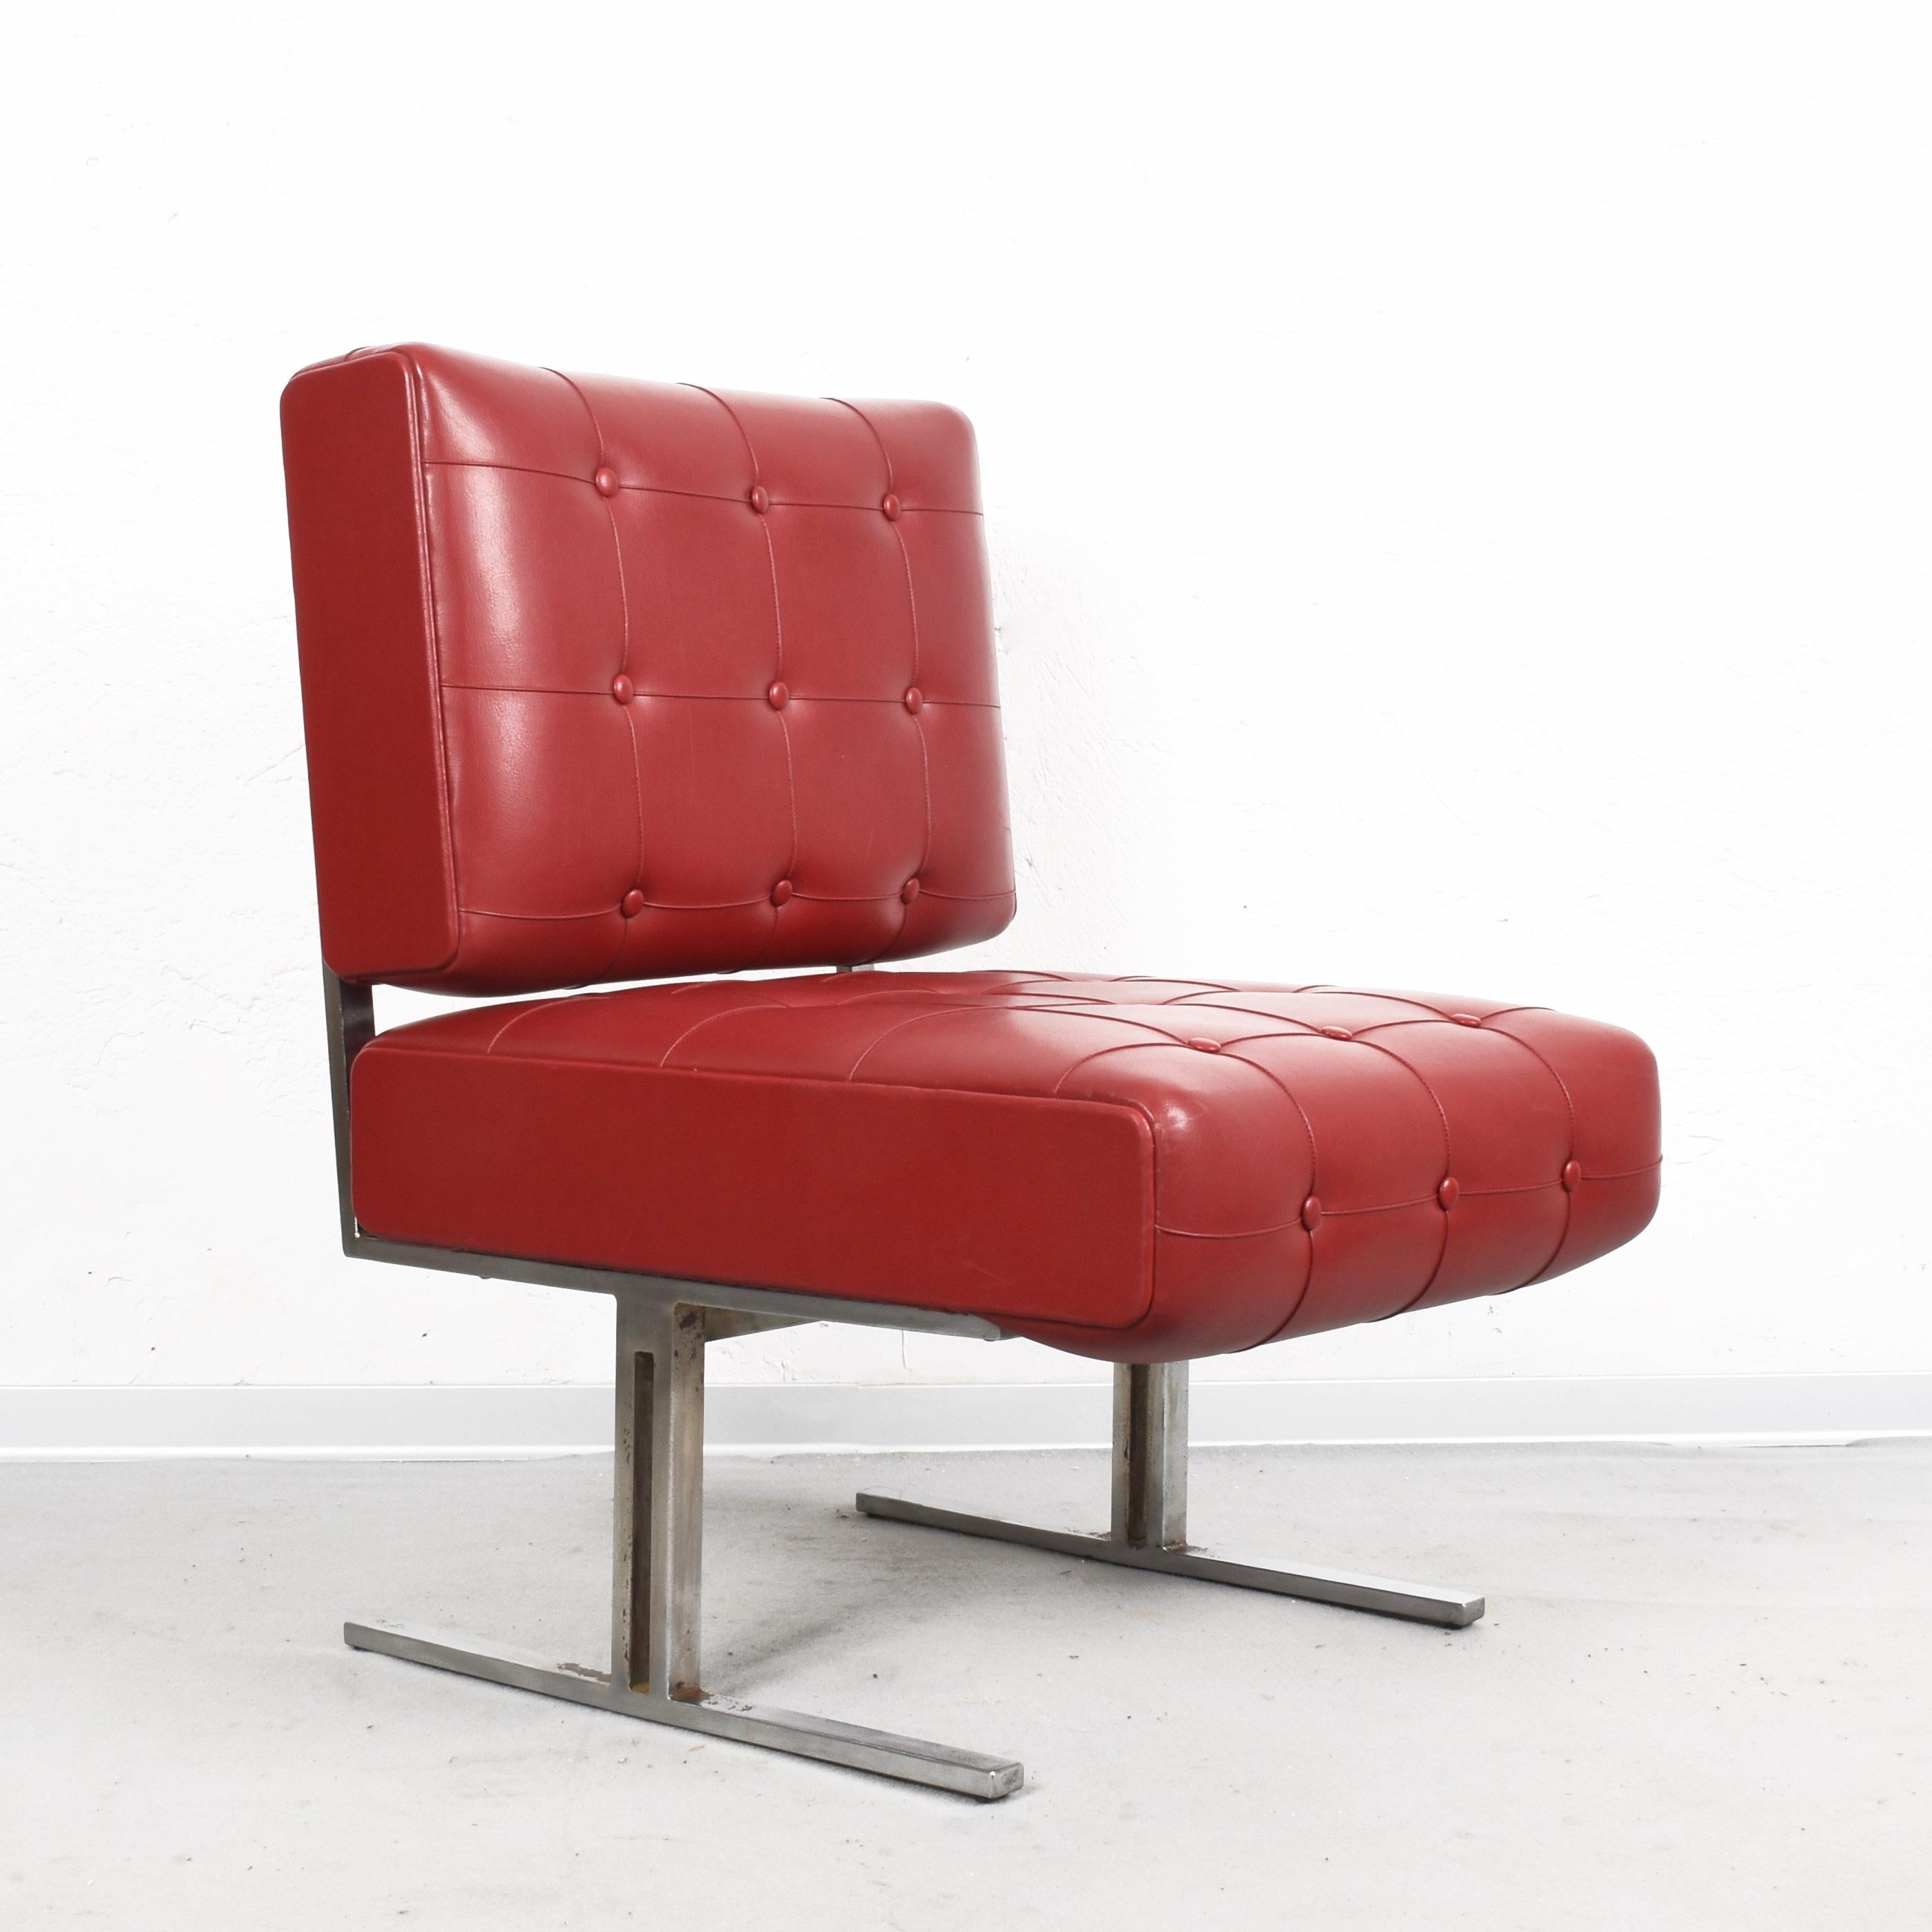 20th Century Pair of Steel and Red Faux Leather Armchairs Skay after Hausmann De Sede, 1950s For Sale